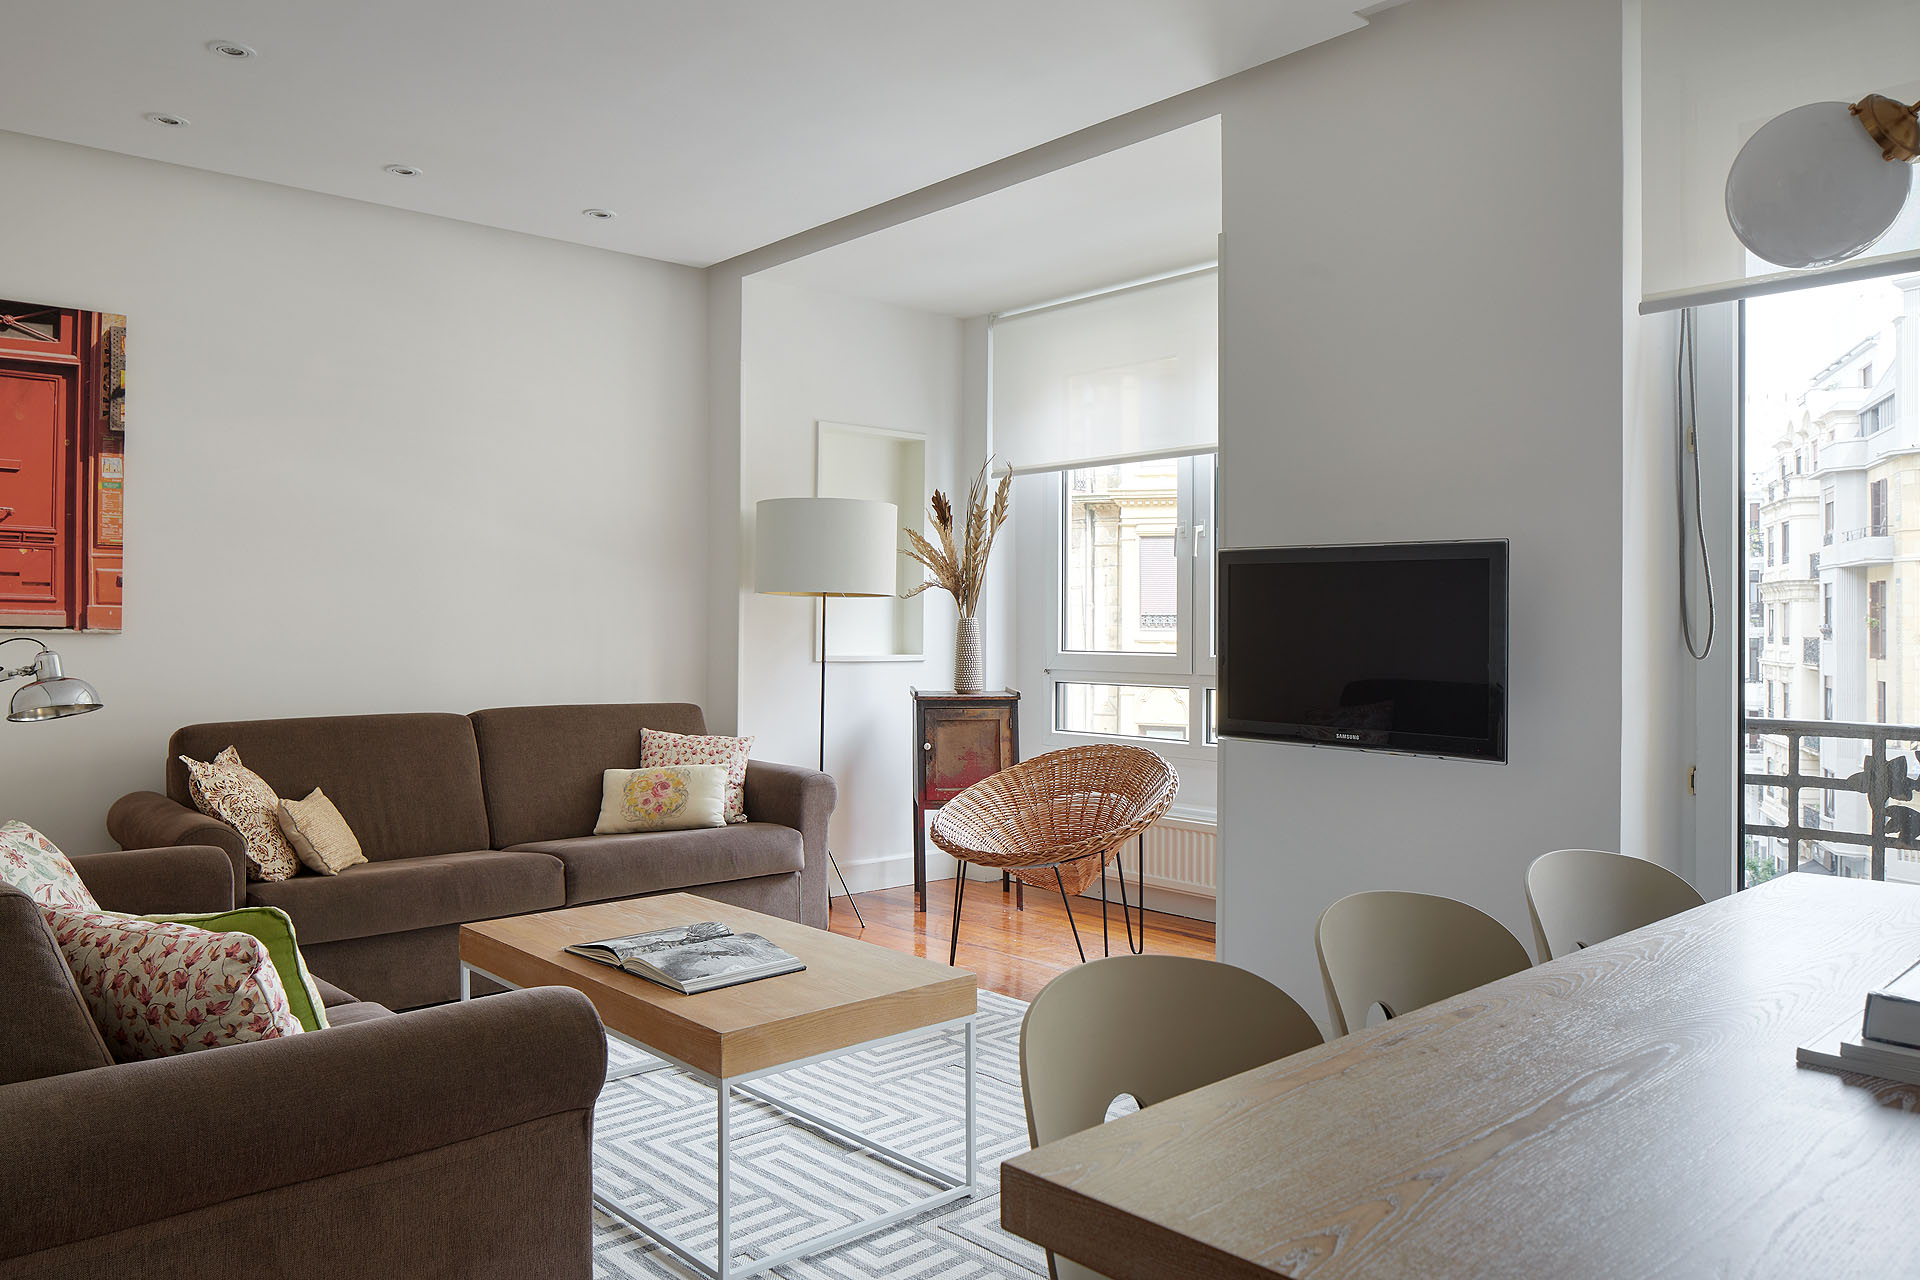 Property Image 1 - Striking Spacious Apartment close to the City Center